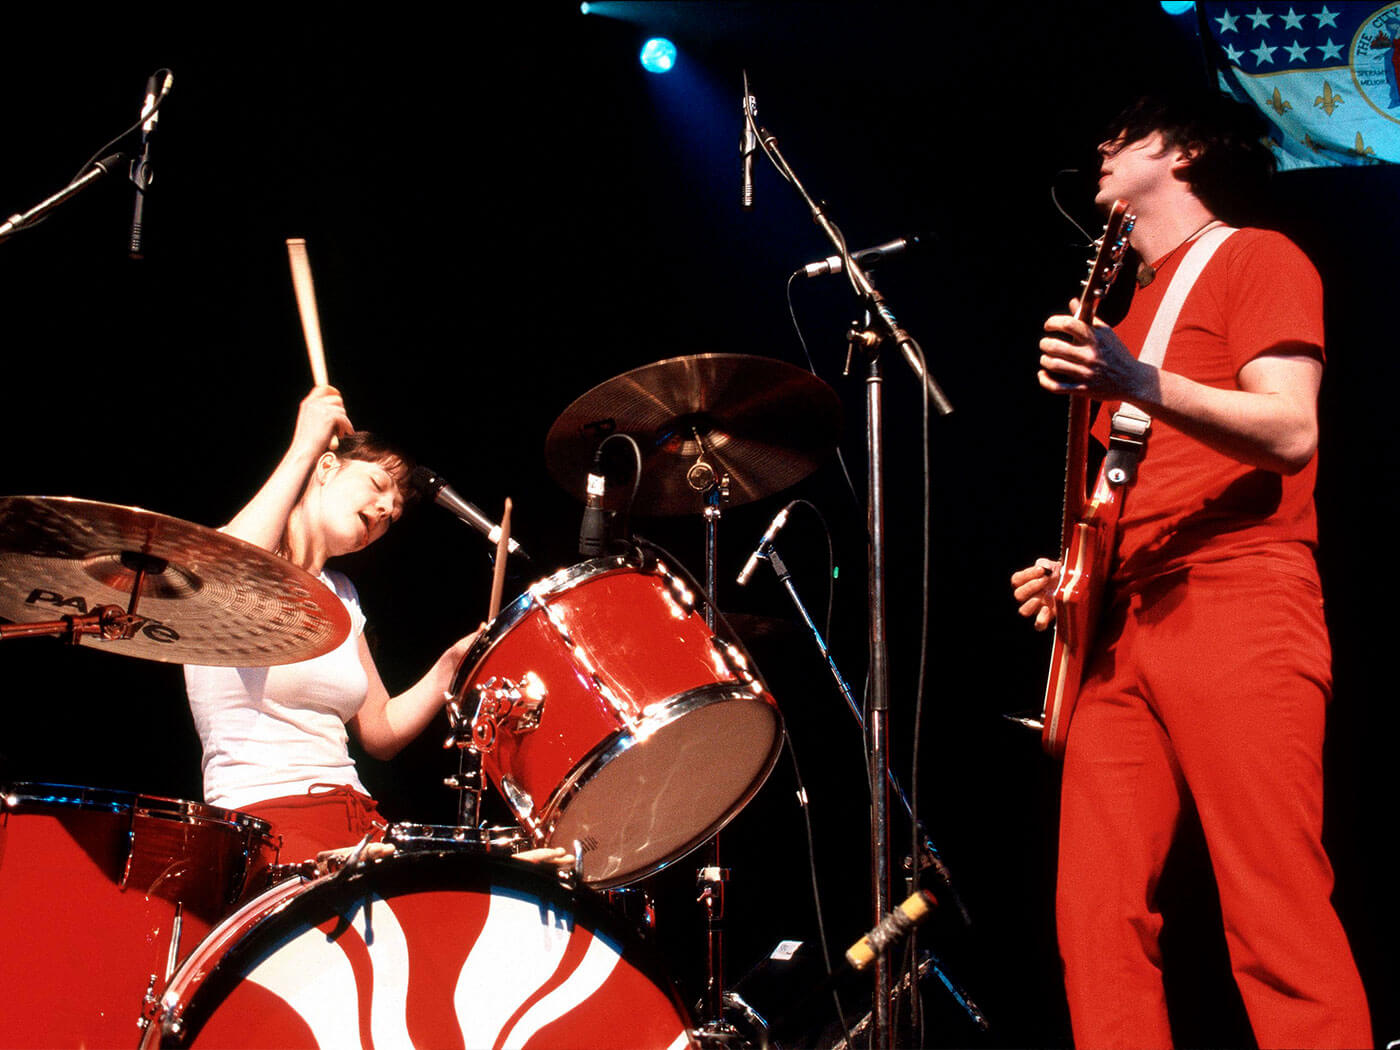 The White Stripes performing in 2001